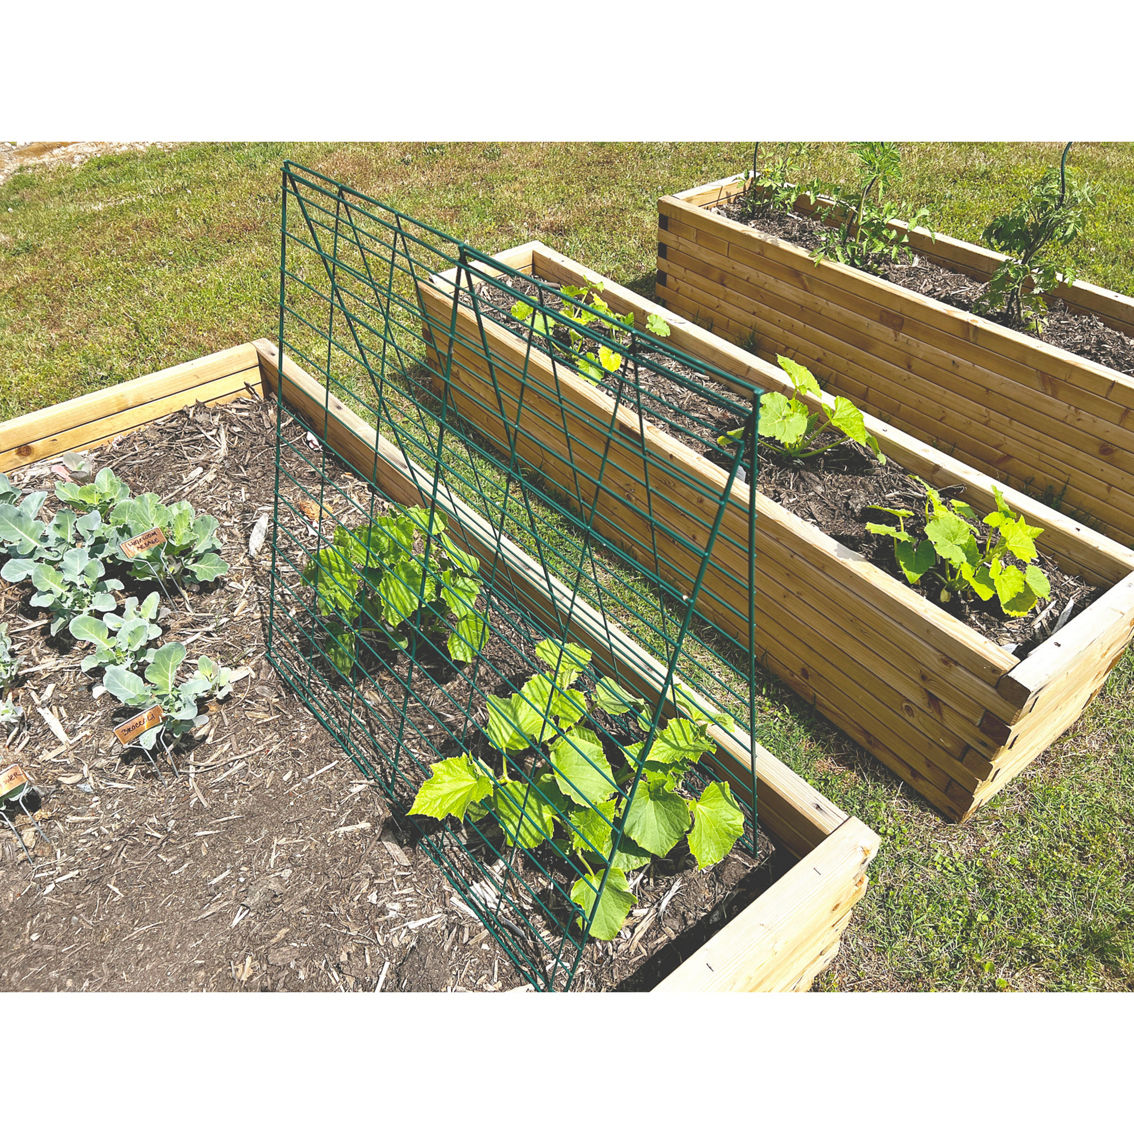 Bosmere Steel Vegetable Trellis Set with 4 Panels 30 x 30 x 30 in. - Image 2 of 2